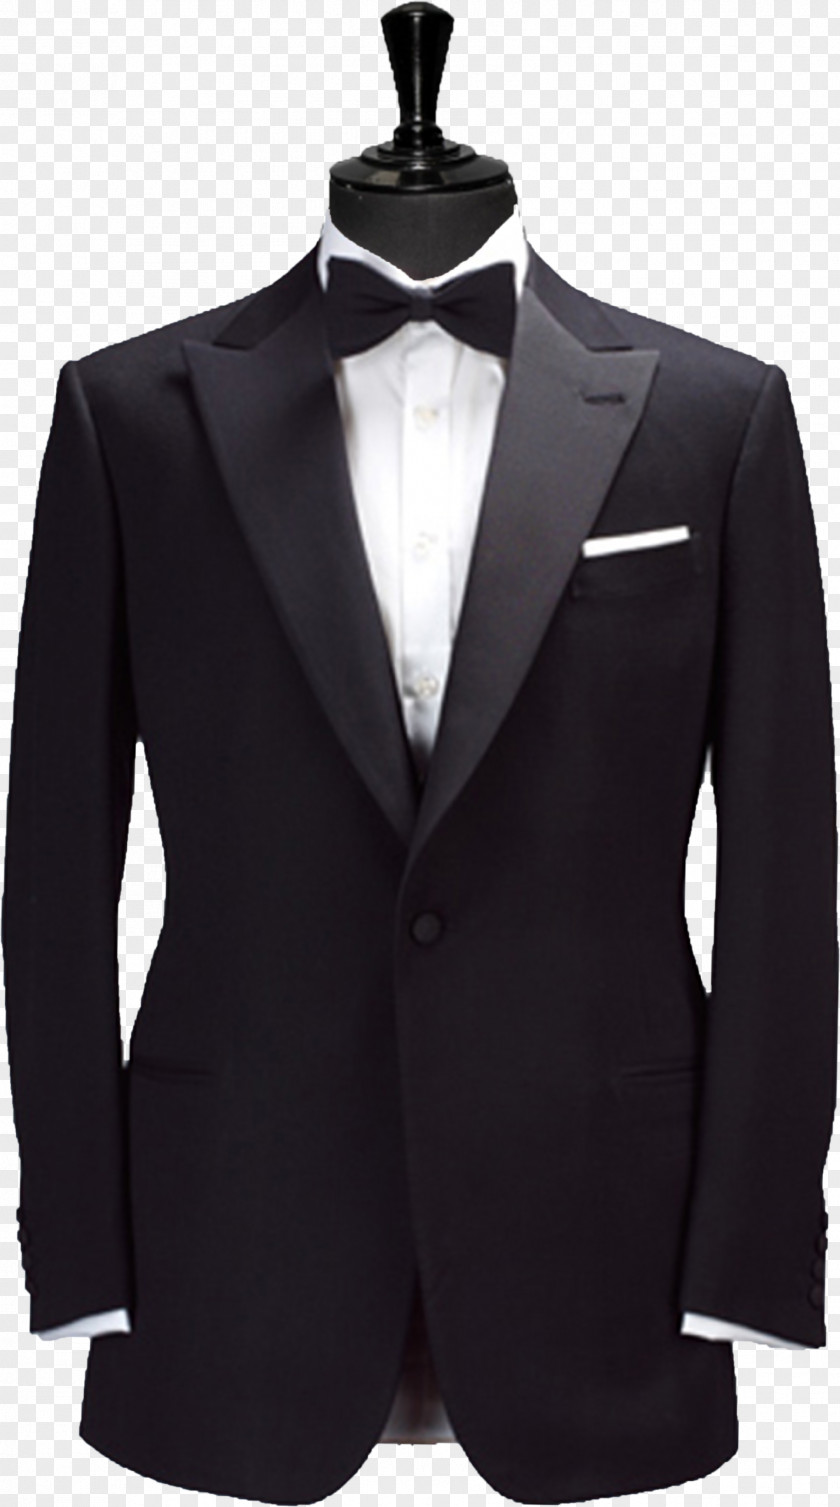 Tuxedo Savile Row Suit Henry Poole & Co Tailor PNG